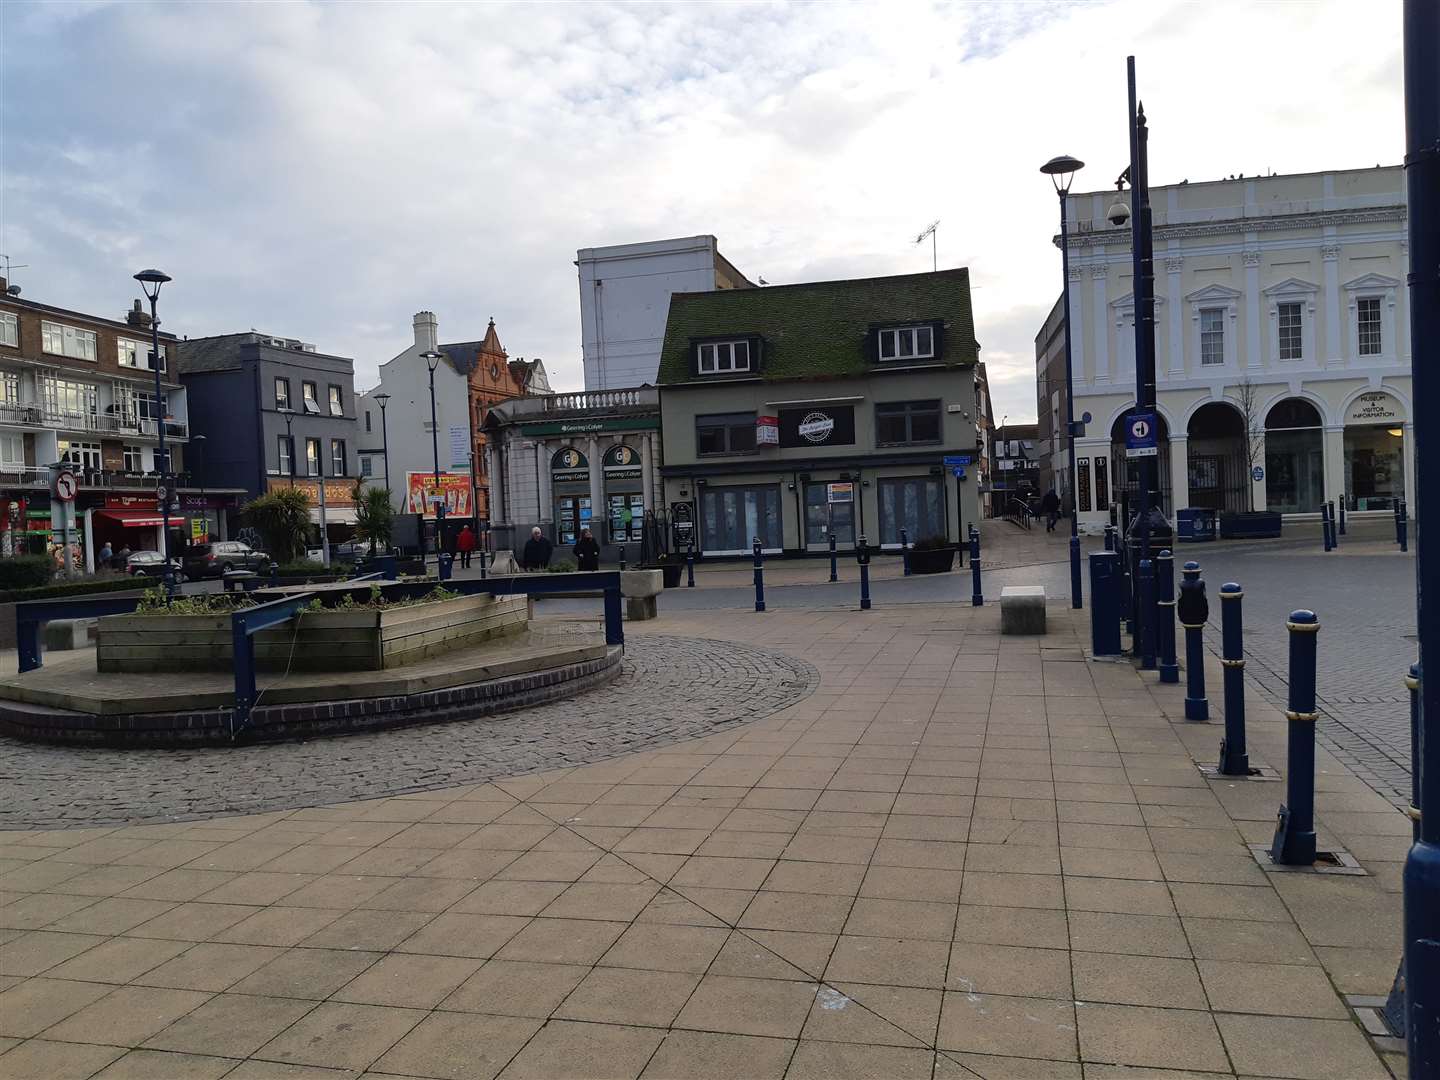 Burton had been in Market Square since the 1950s